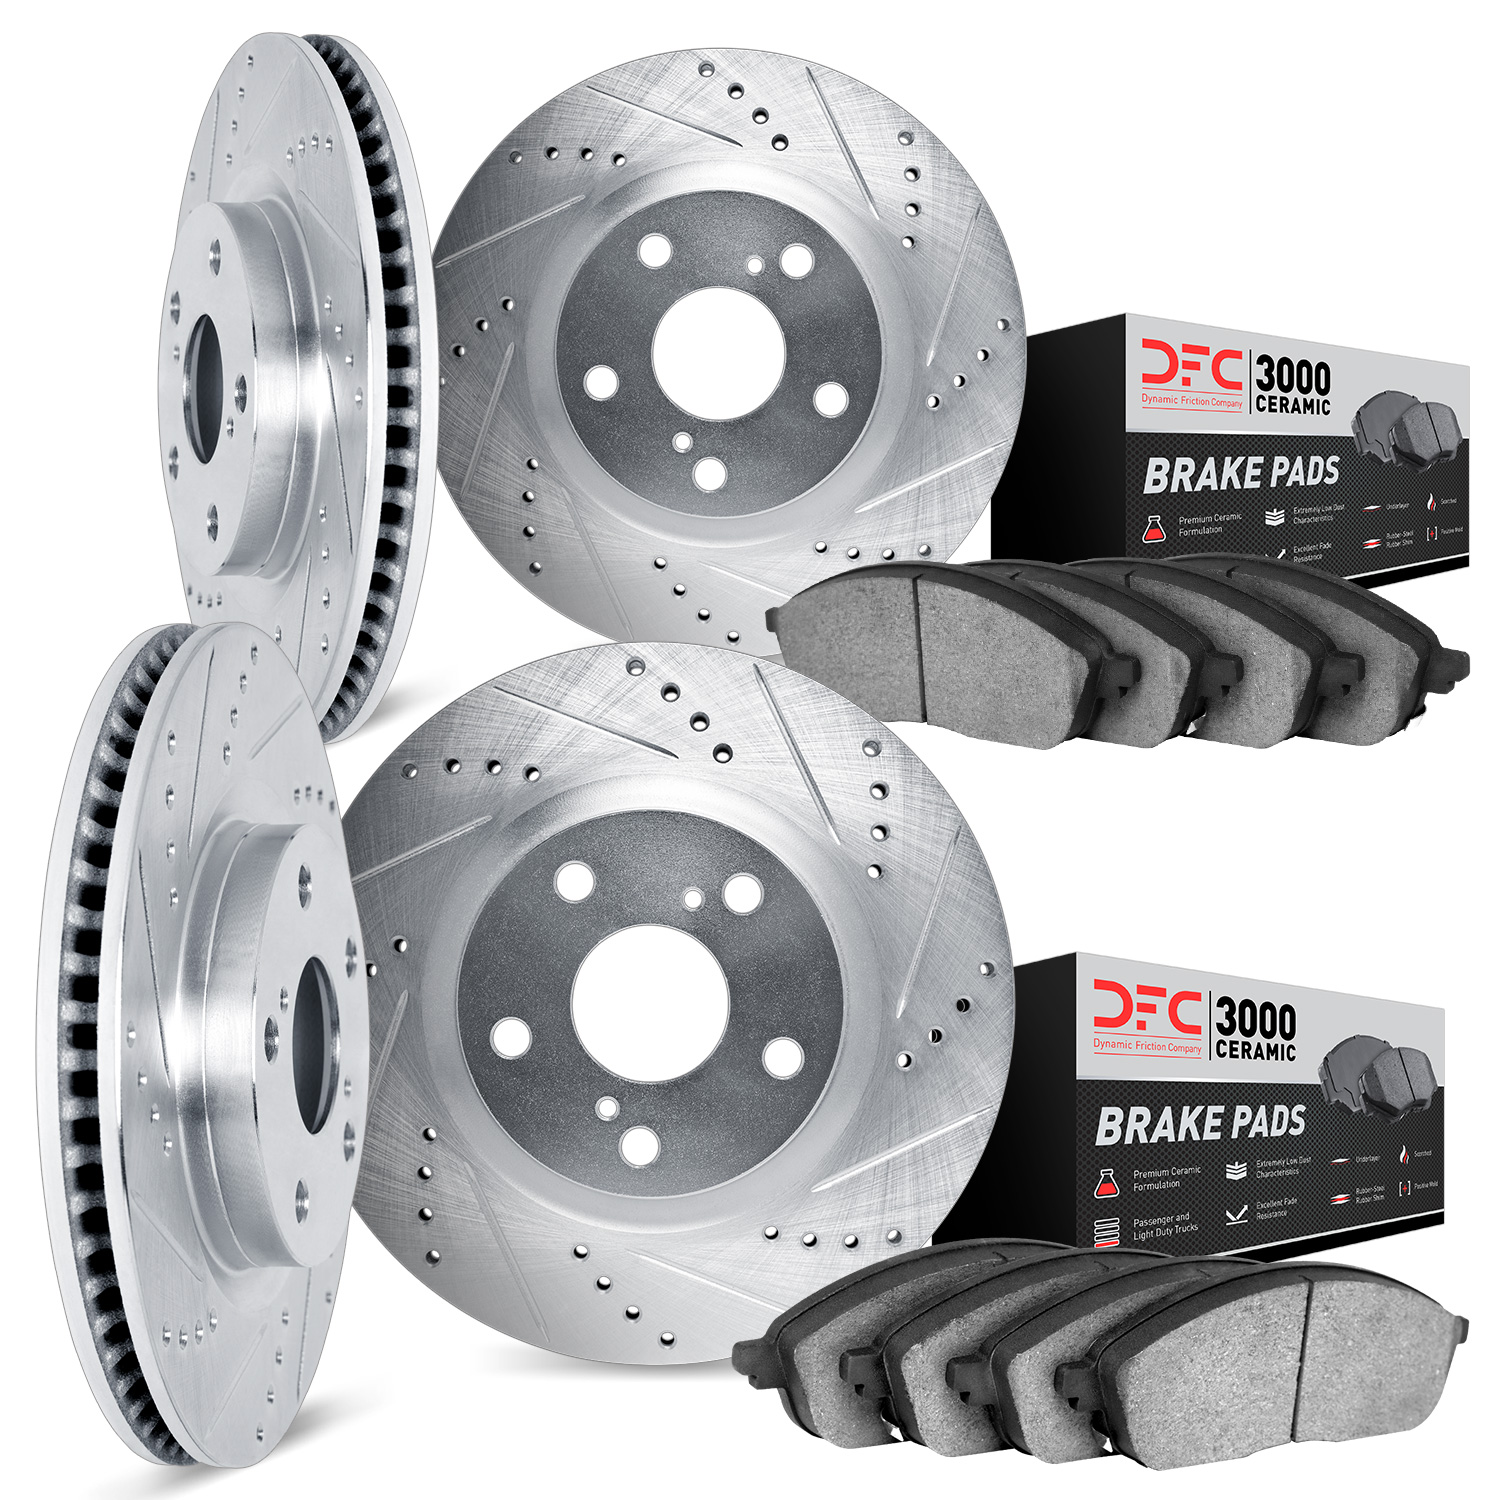 7304-76010 Drilled/Slotted Brake Rotor with 3000-Series Ceramic Brake Pads Kit [Silver], 1991-1995 Lexus/Toyota/Scion, Position: